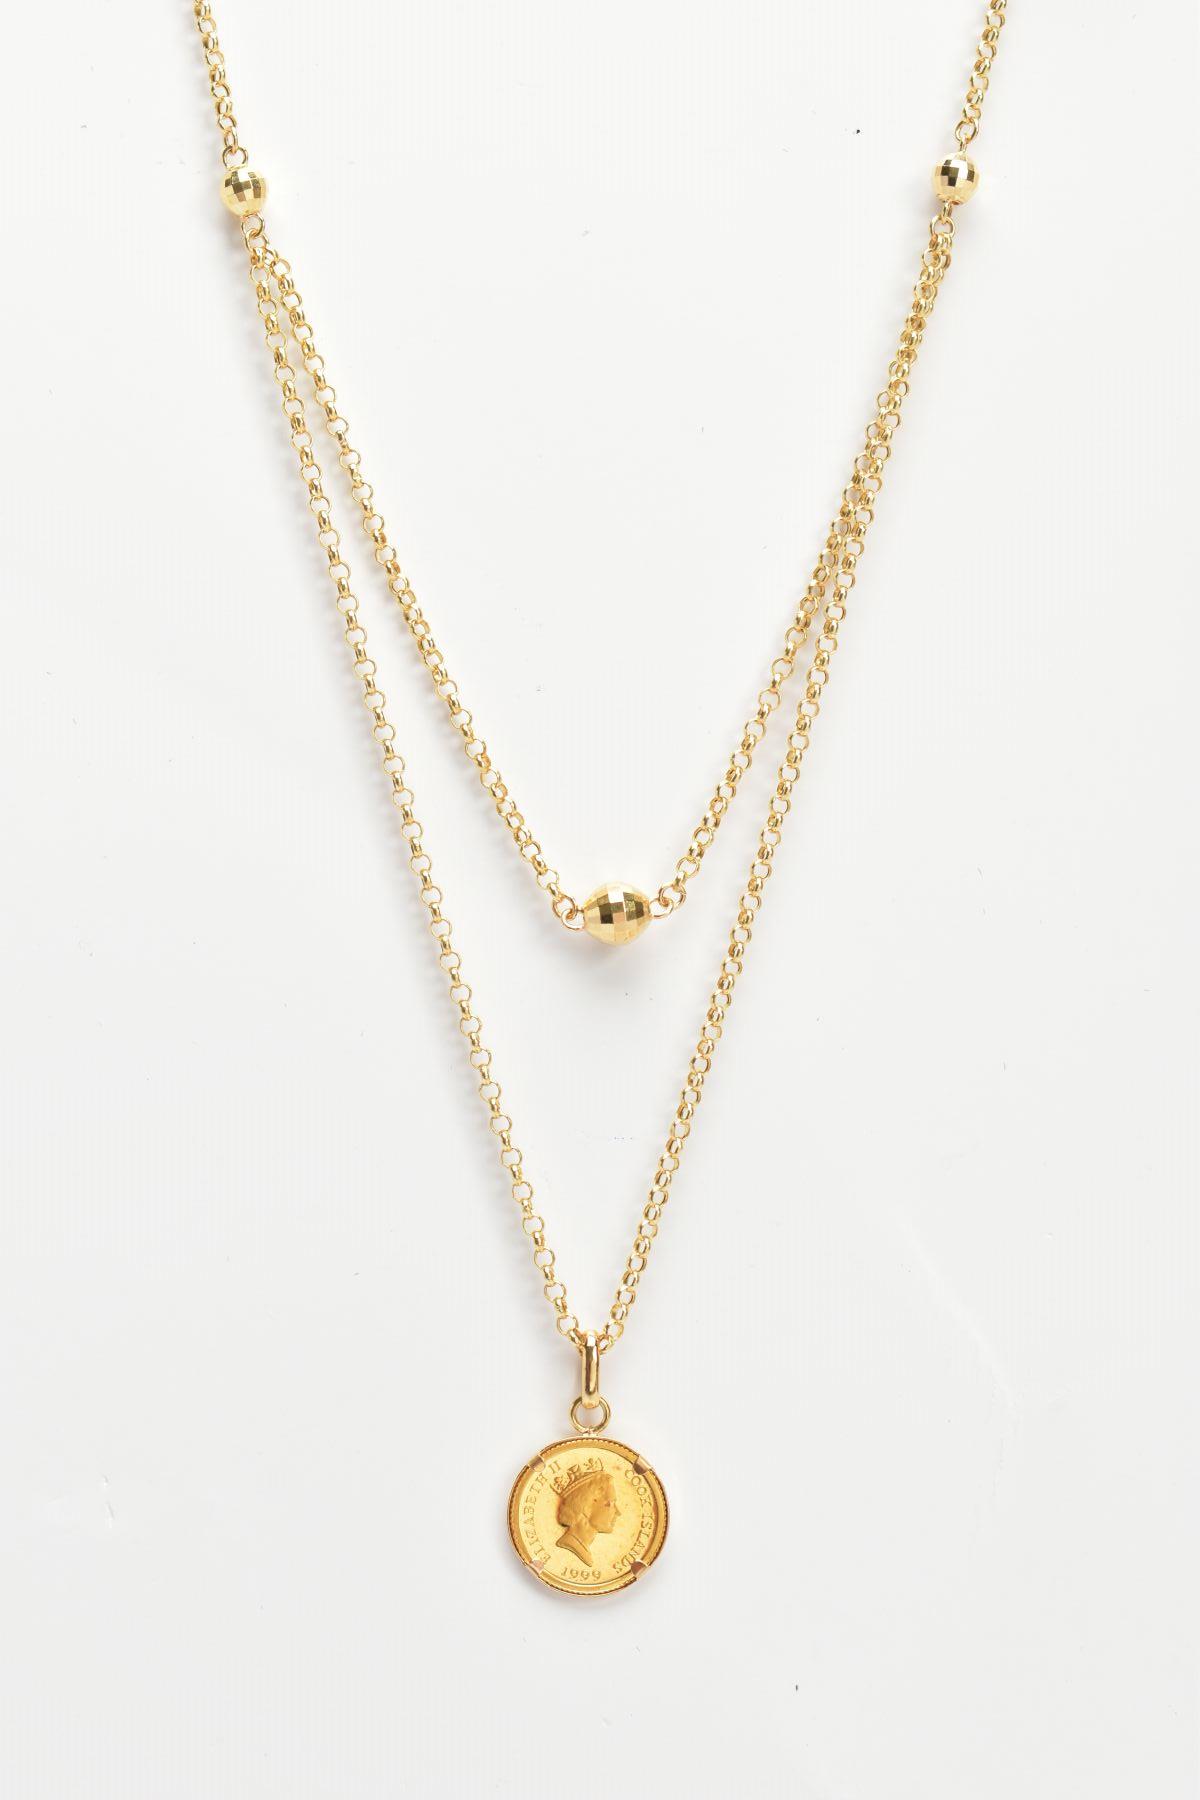 AN 18CT GOLD CHAIN NECKLACE, a fine trace chain, fitted with an additional part chain to appear as a - Bild 2 aus 6